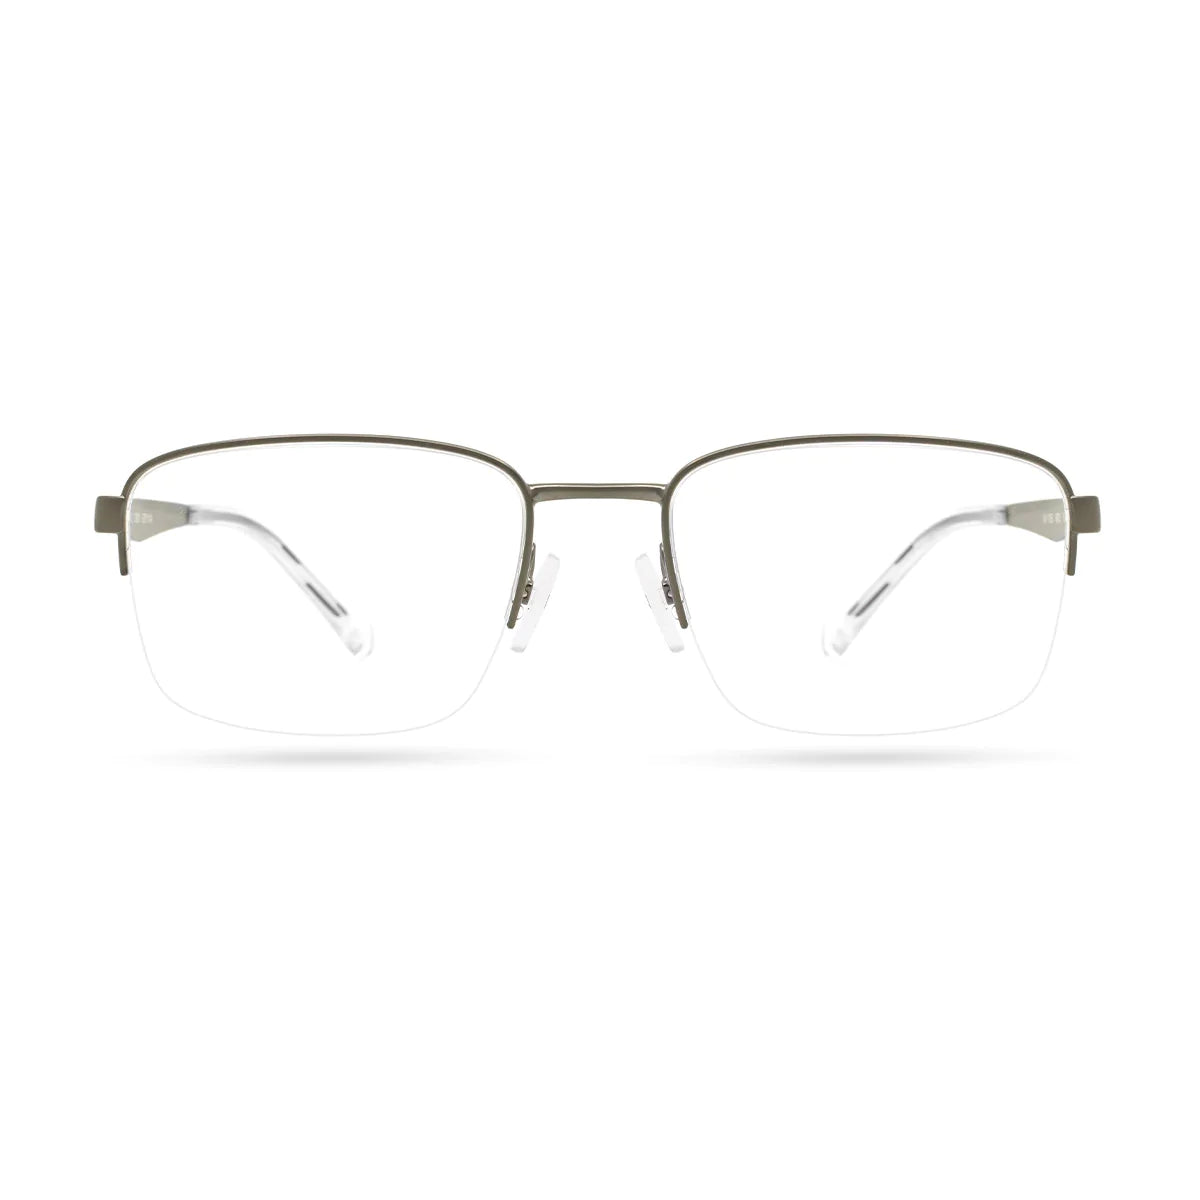 ARMANI EXCHANGE AX 1053 6003 spectacle-frame